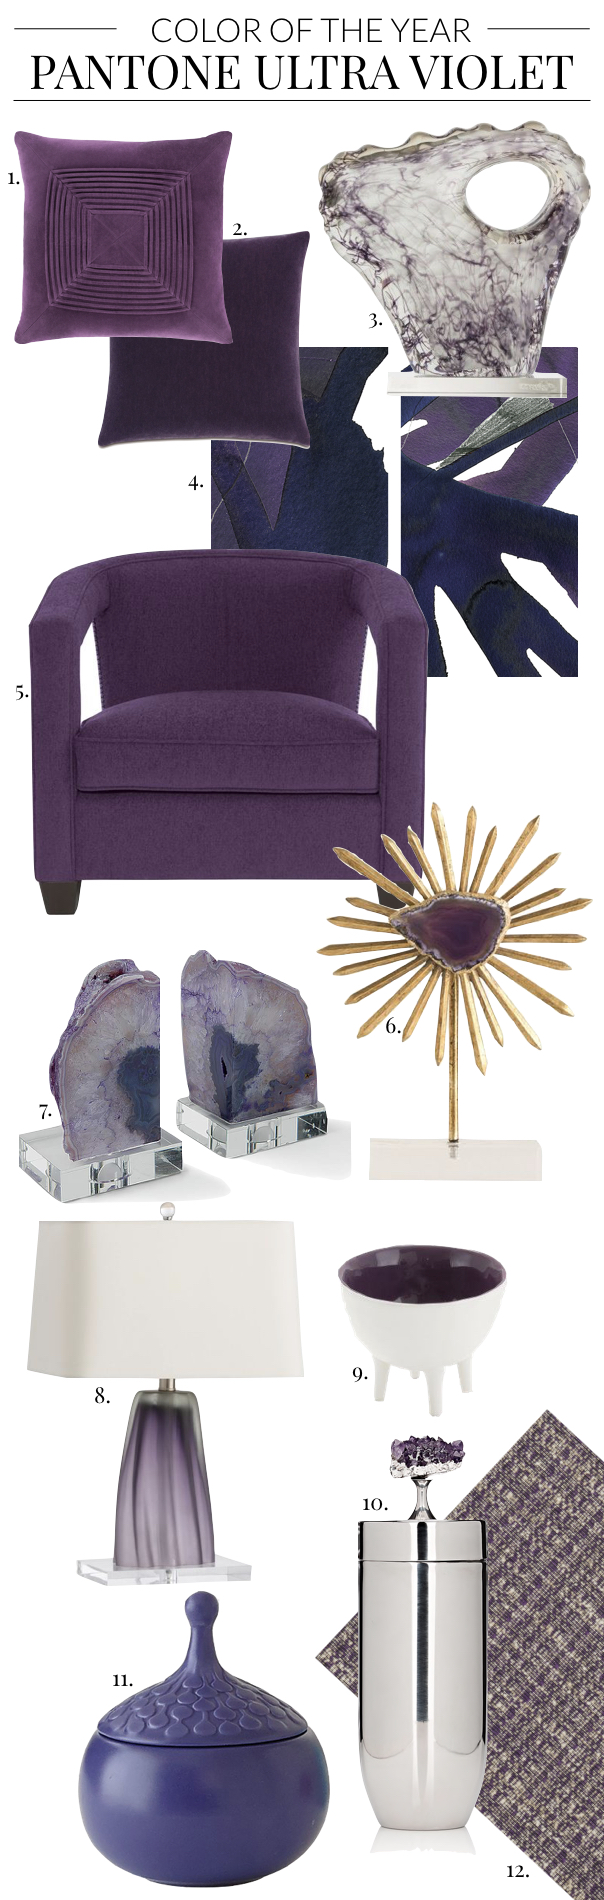 Pantone 2018 Color of the Year Ultra Violet Home and Style Accessories - Stylish Color of the Year Picks